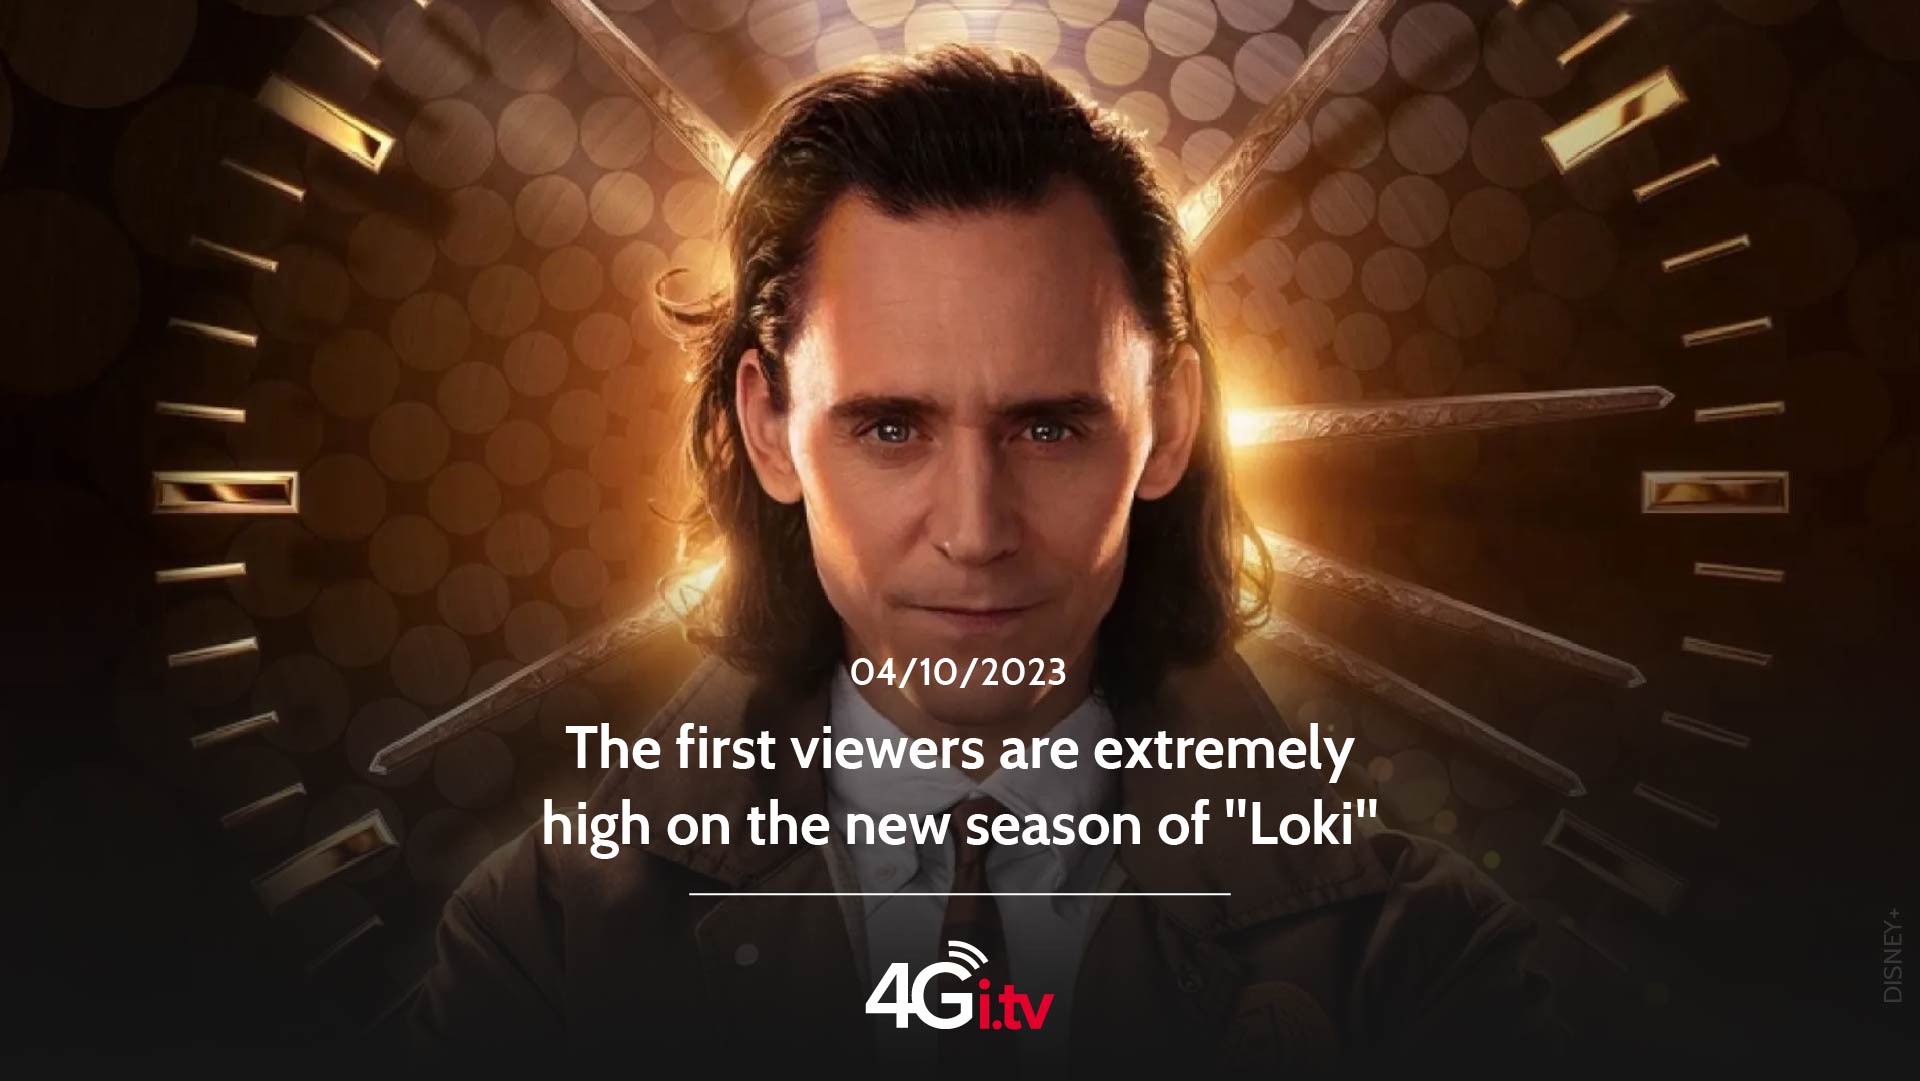 Подробнее о статье The first viewers are extremely high on the new season of “Loki”